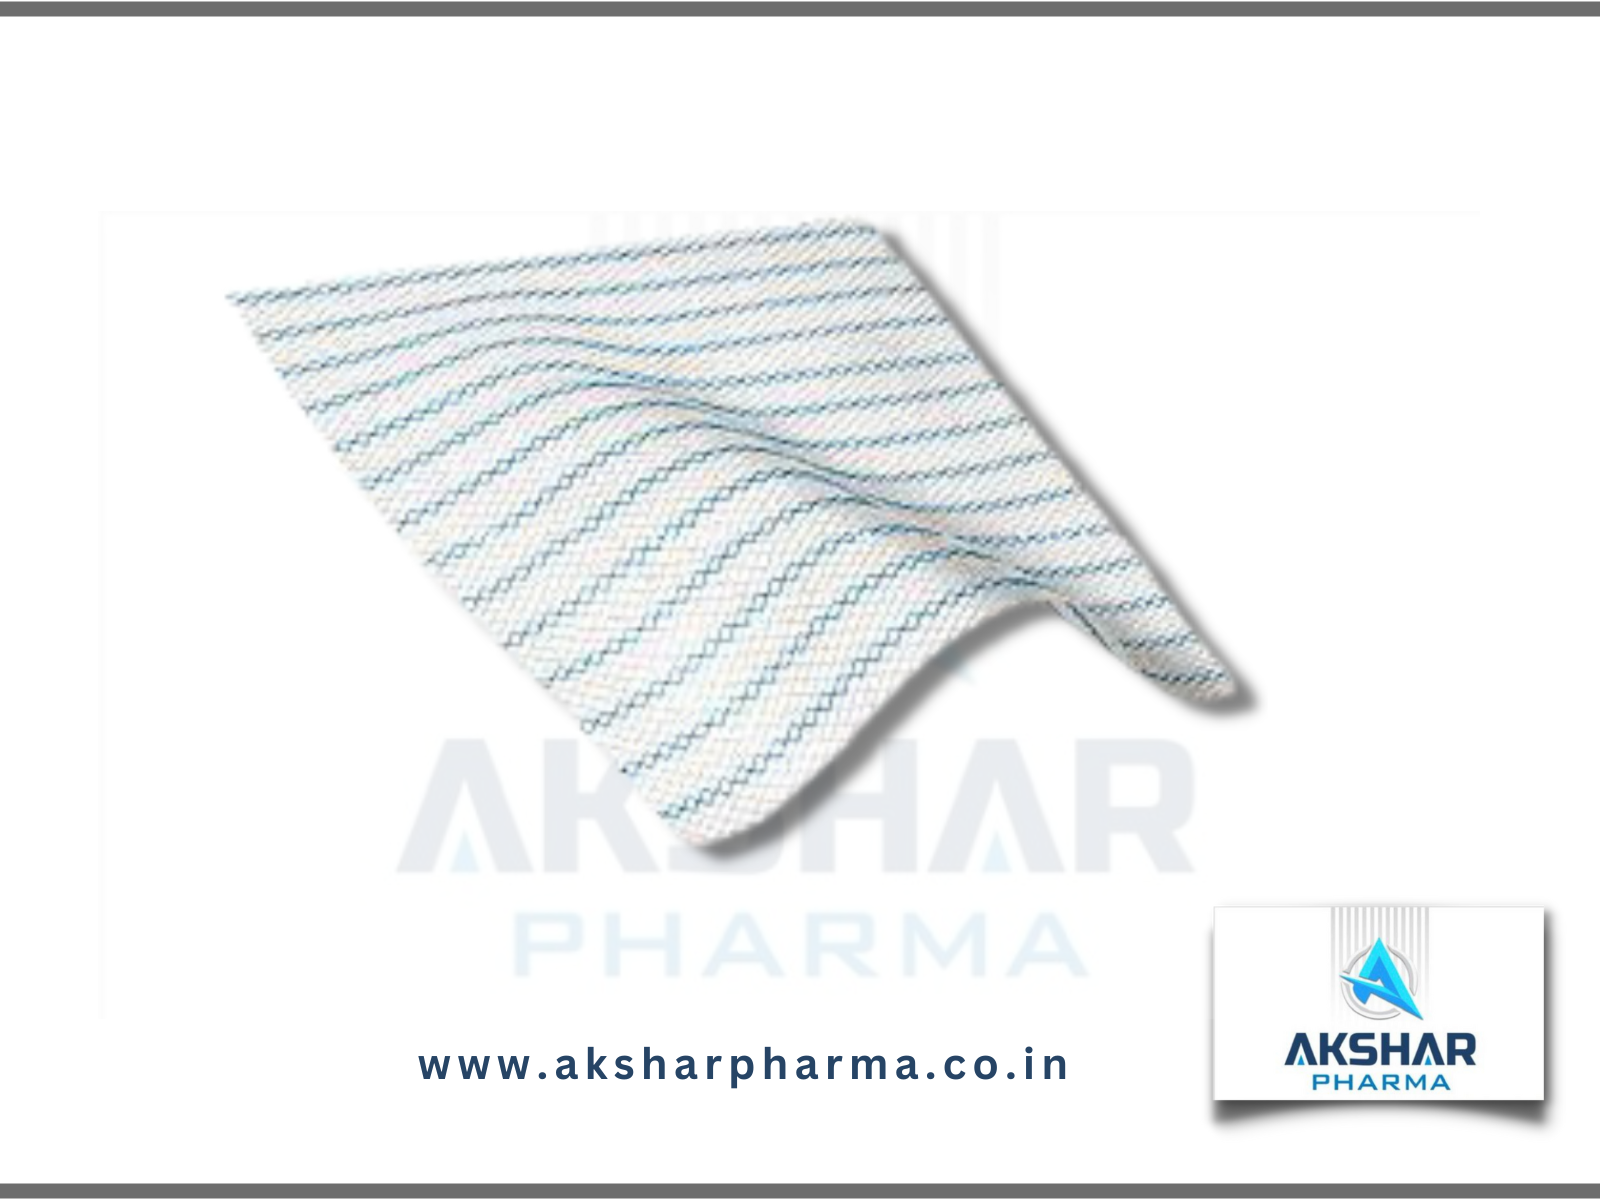 ULTRAPRO Macroporous Partially Absorbable Mesh